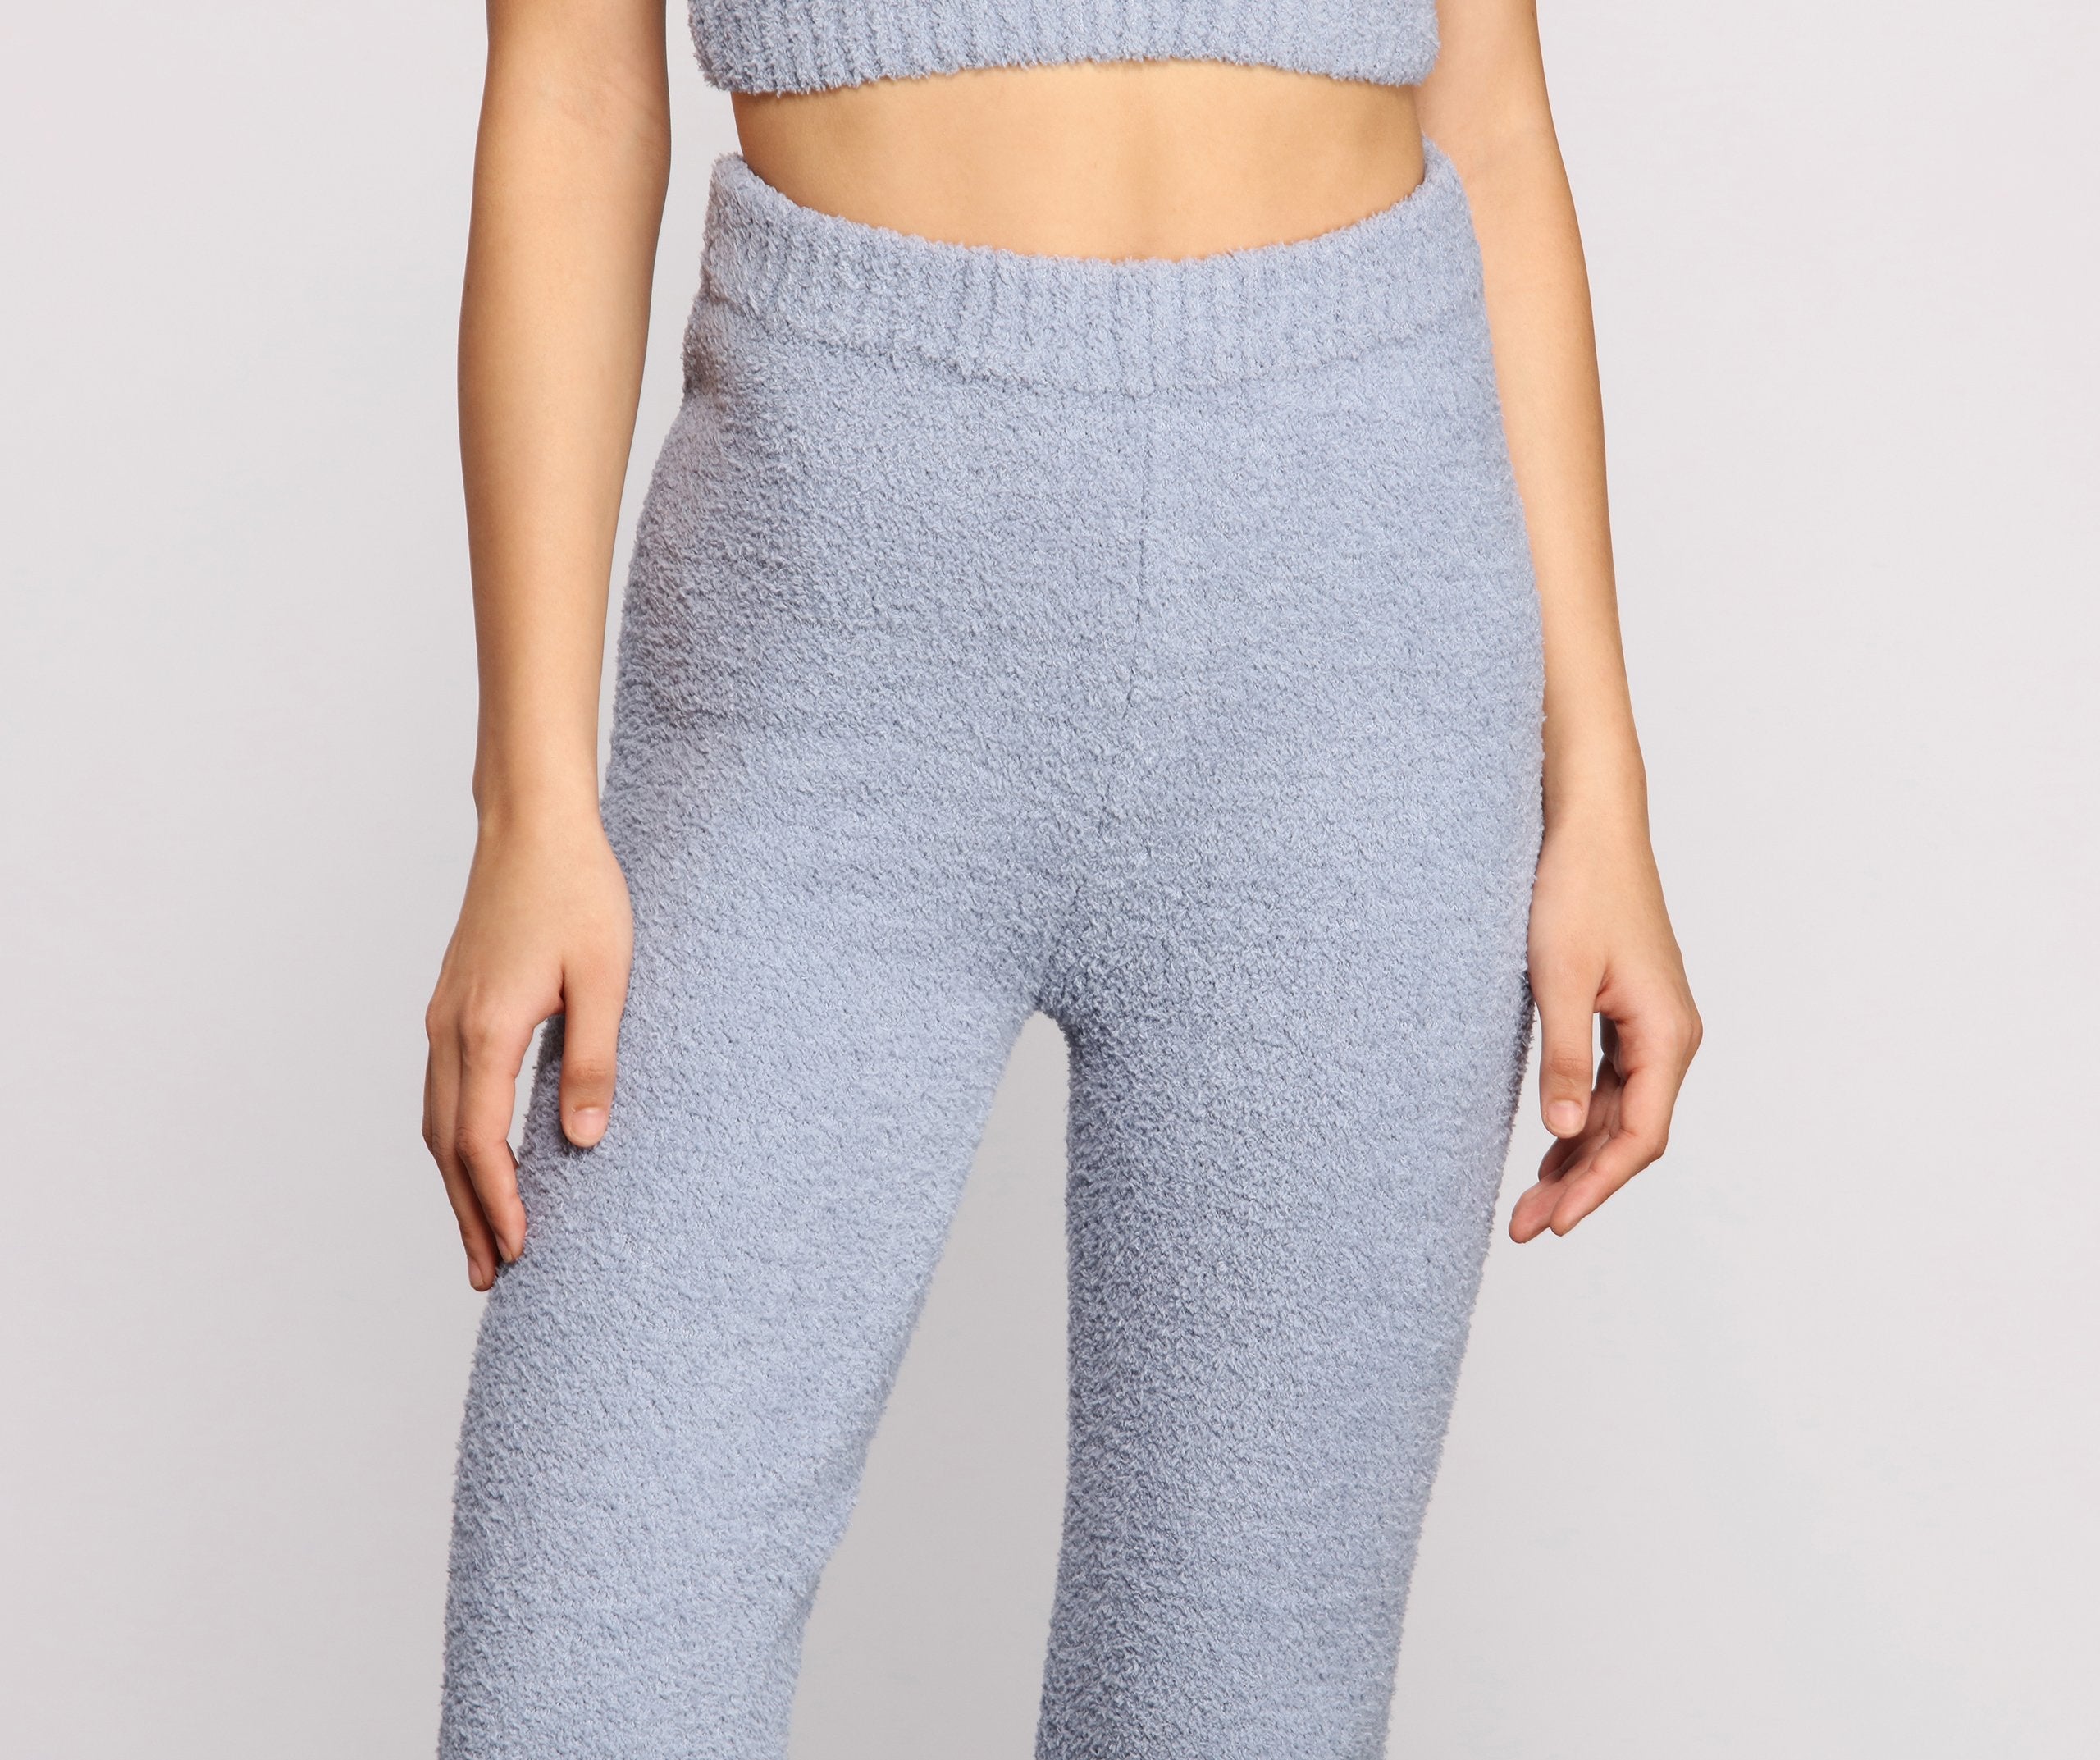 Chic Chenille Knit High Waist Leggings - Lady Occasions